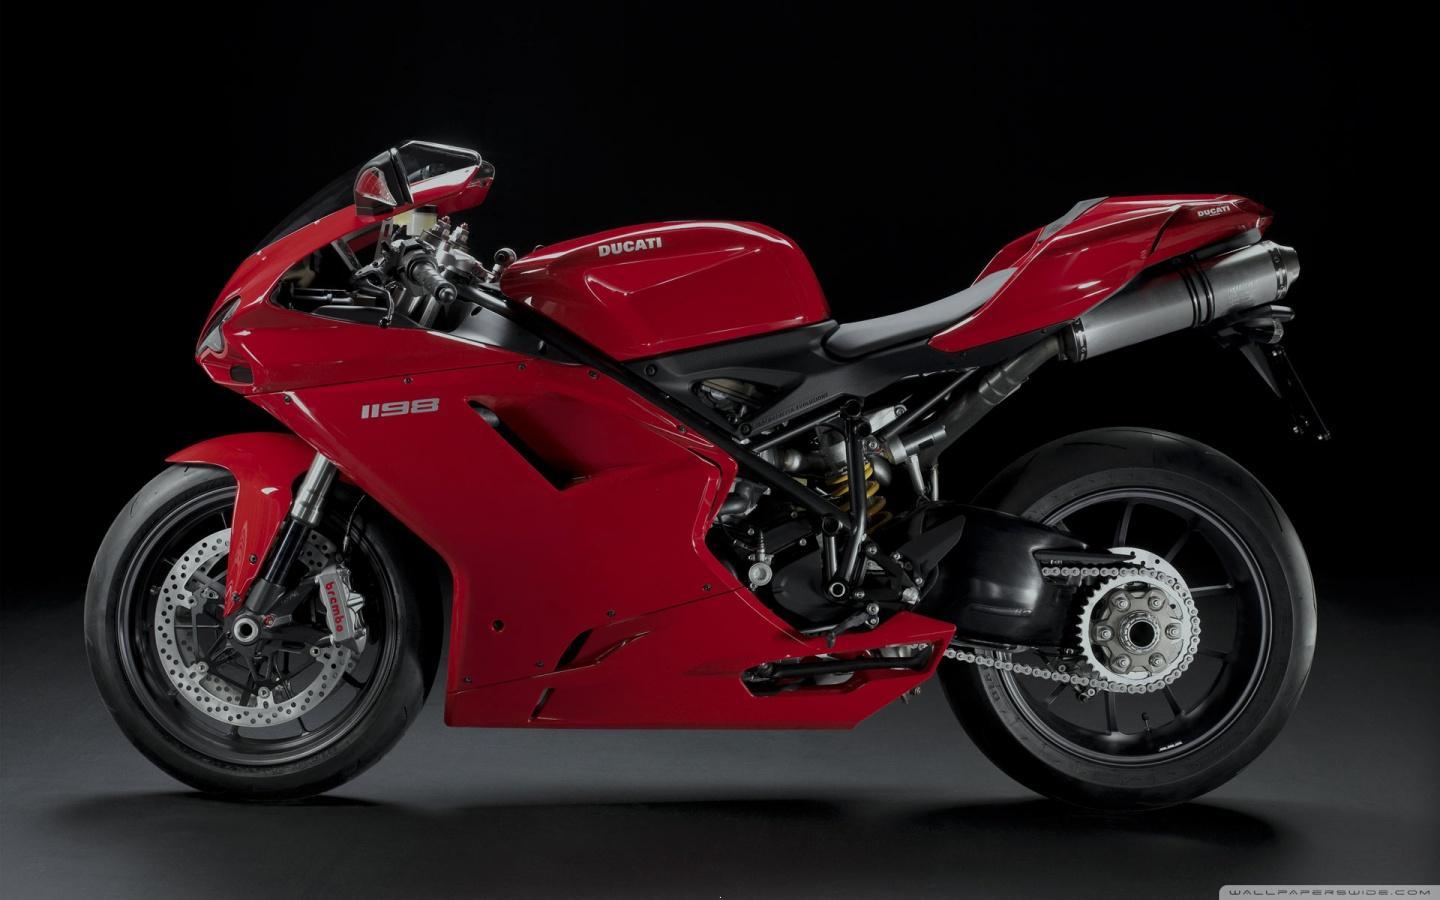 Download Ducati 1098 superbike 1 wallpaper wallpaper for your mobile cell phone